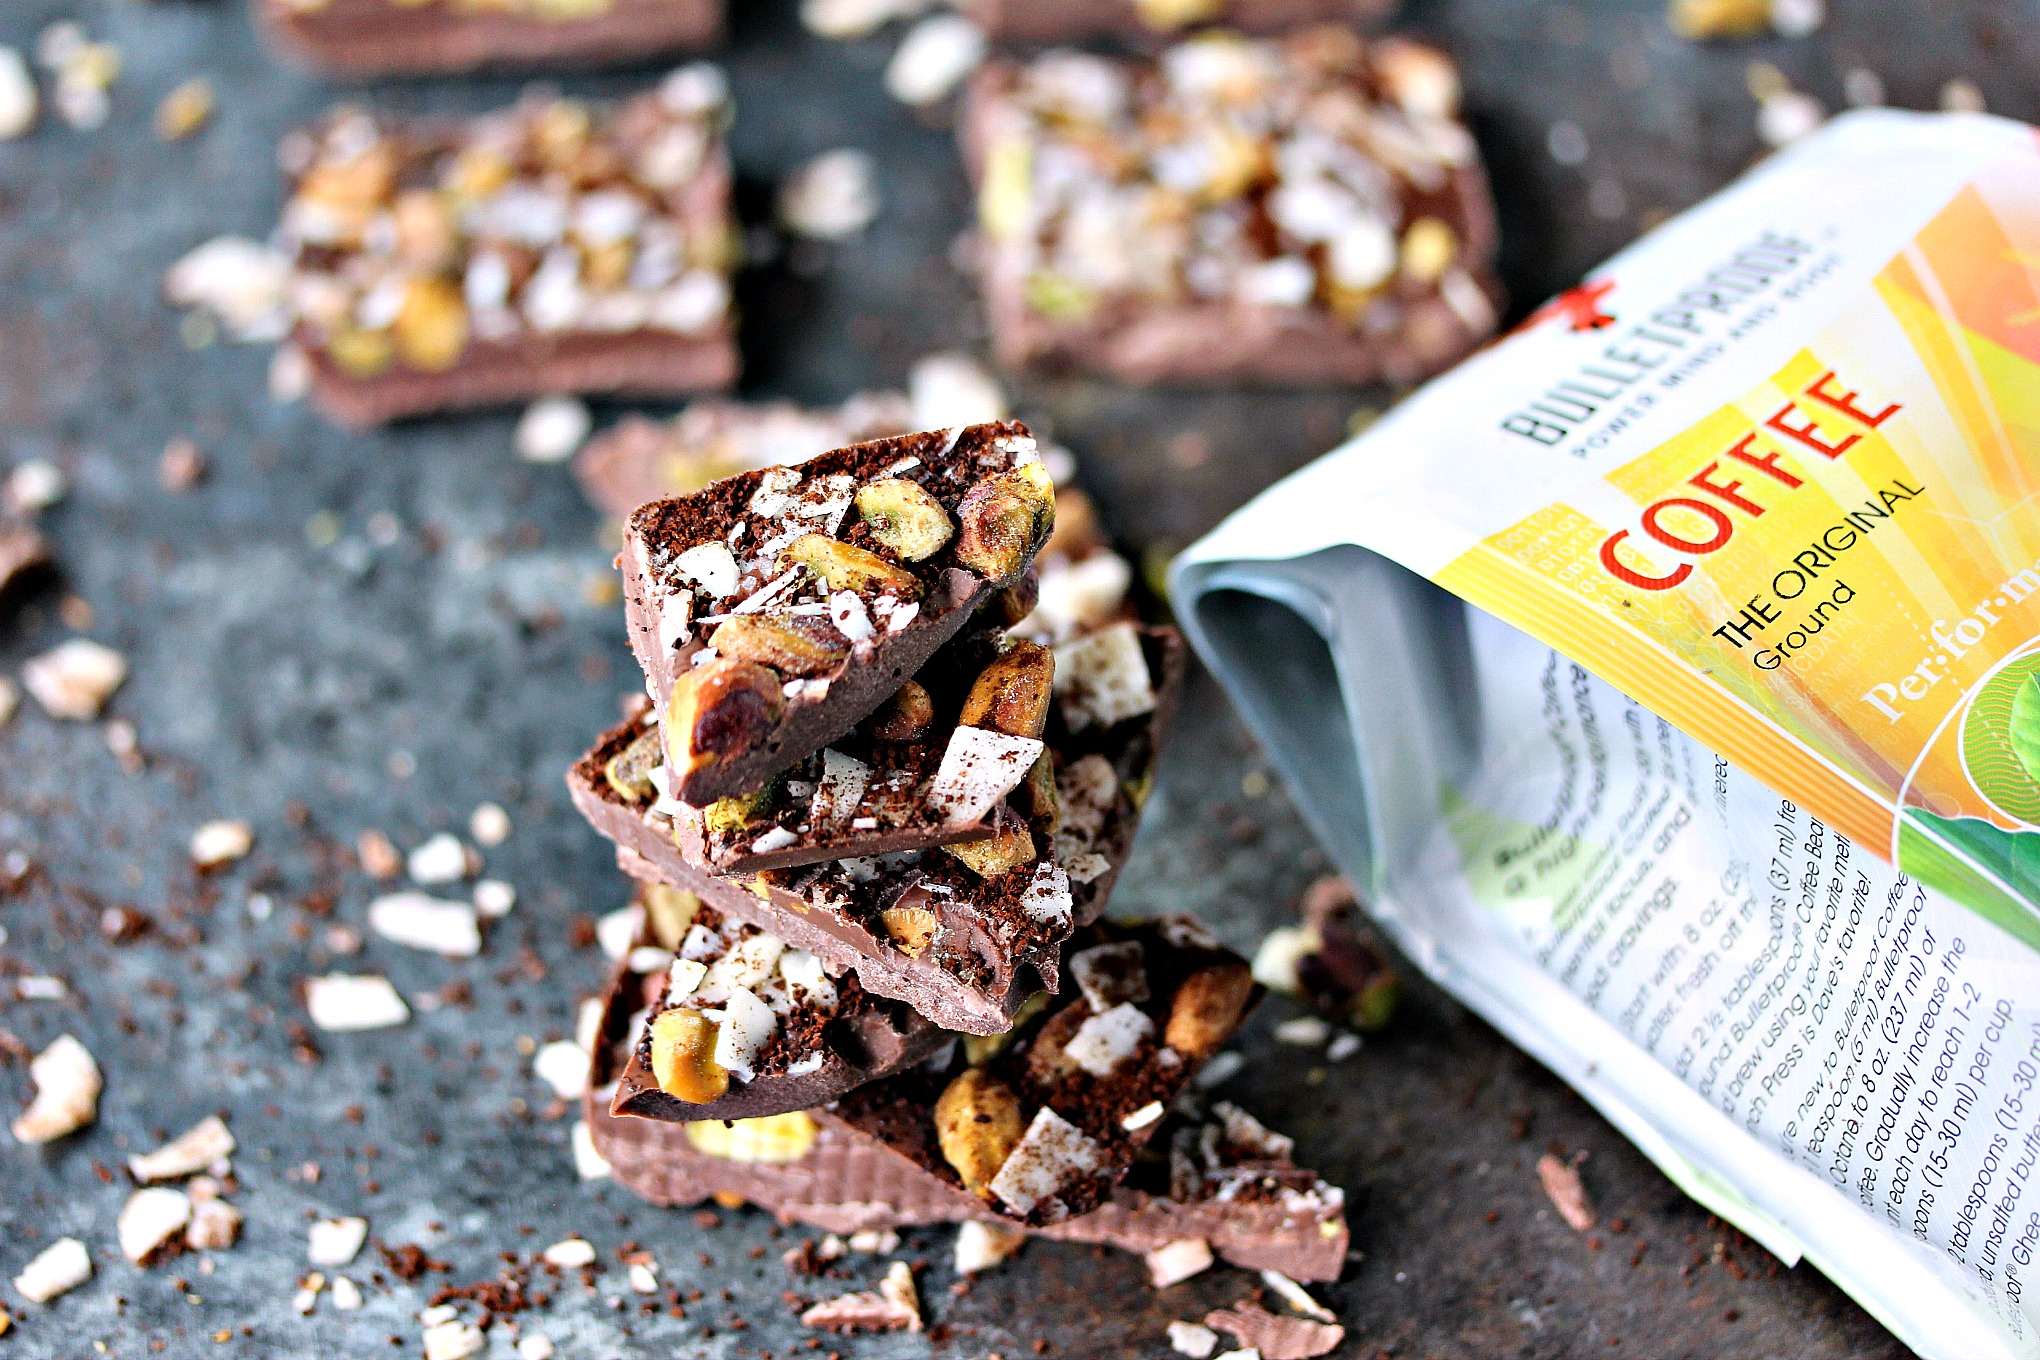 Chocolate Bark with Coconut Chips, Pistachios, and Coffee from cravingsofalunatic.com- This recipe can be made with any kind of chocolate you prefer. Made with coconut chips, chopped pistachios, and finely ground coffee. Epic chocolate bark for coffee lovers!